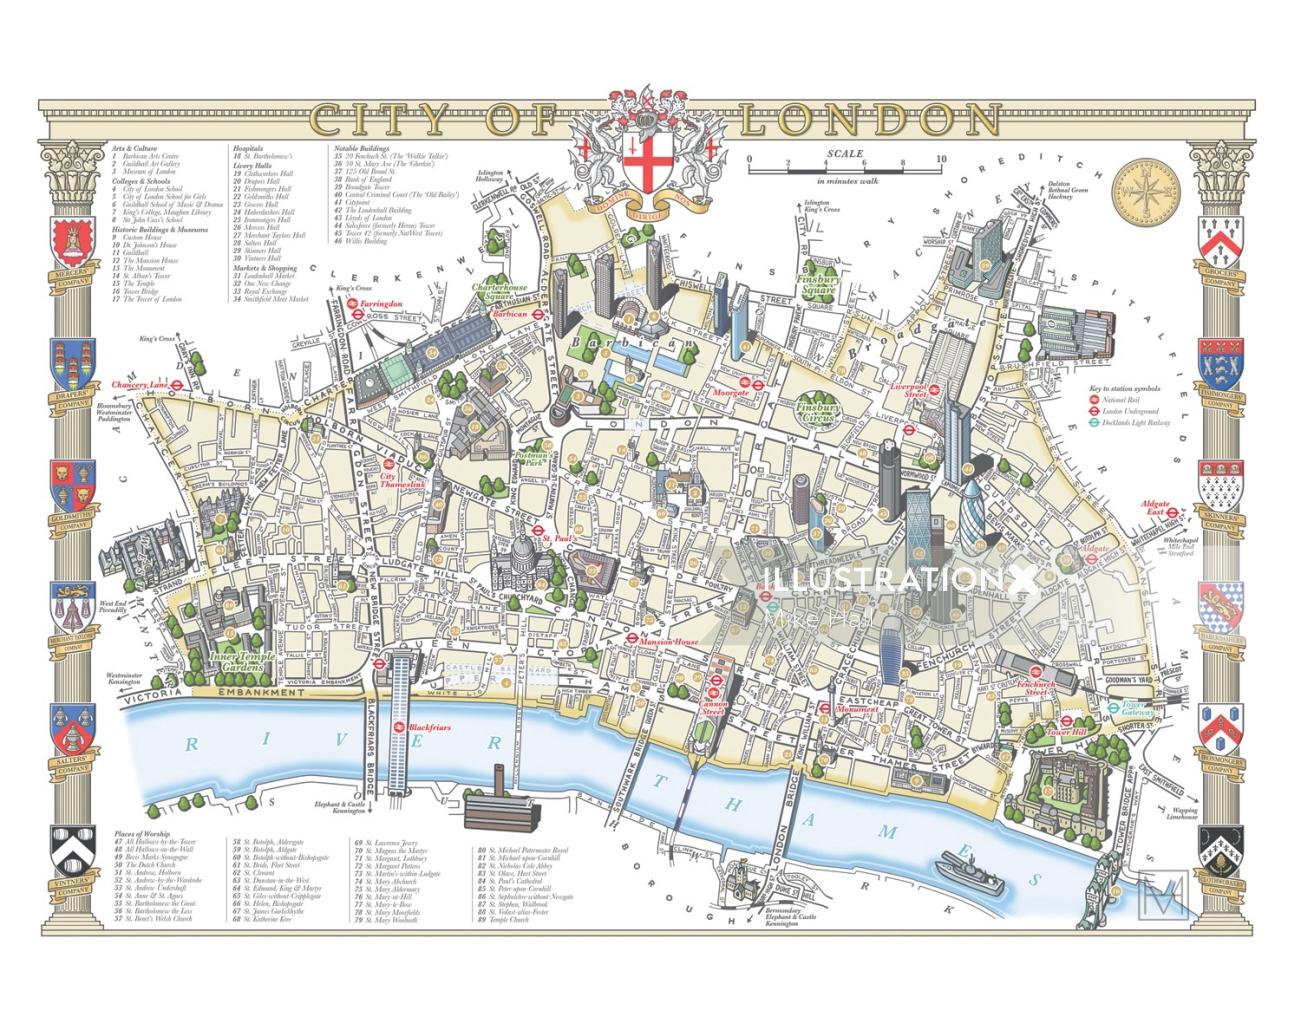 City of London illustrated map